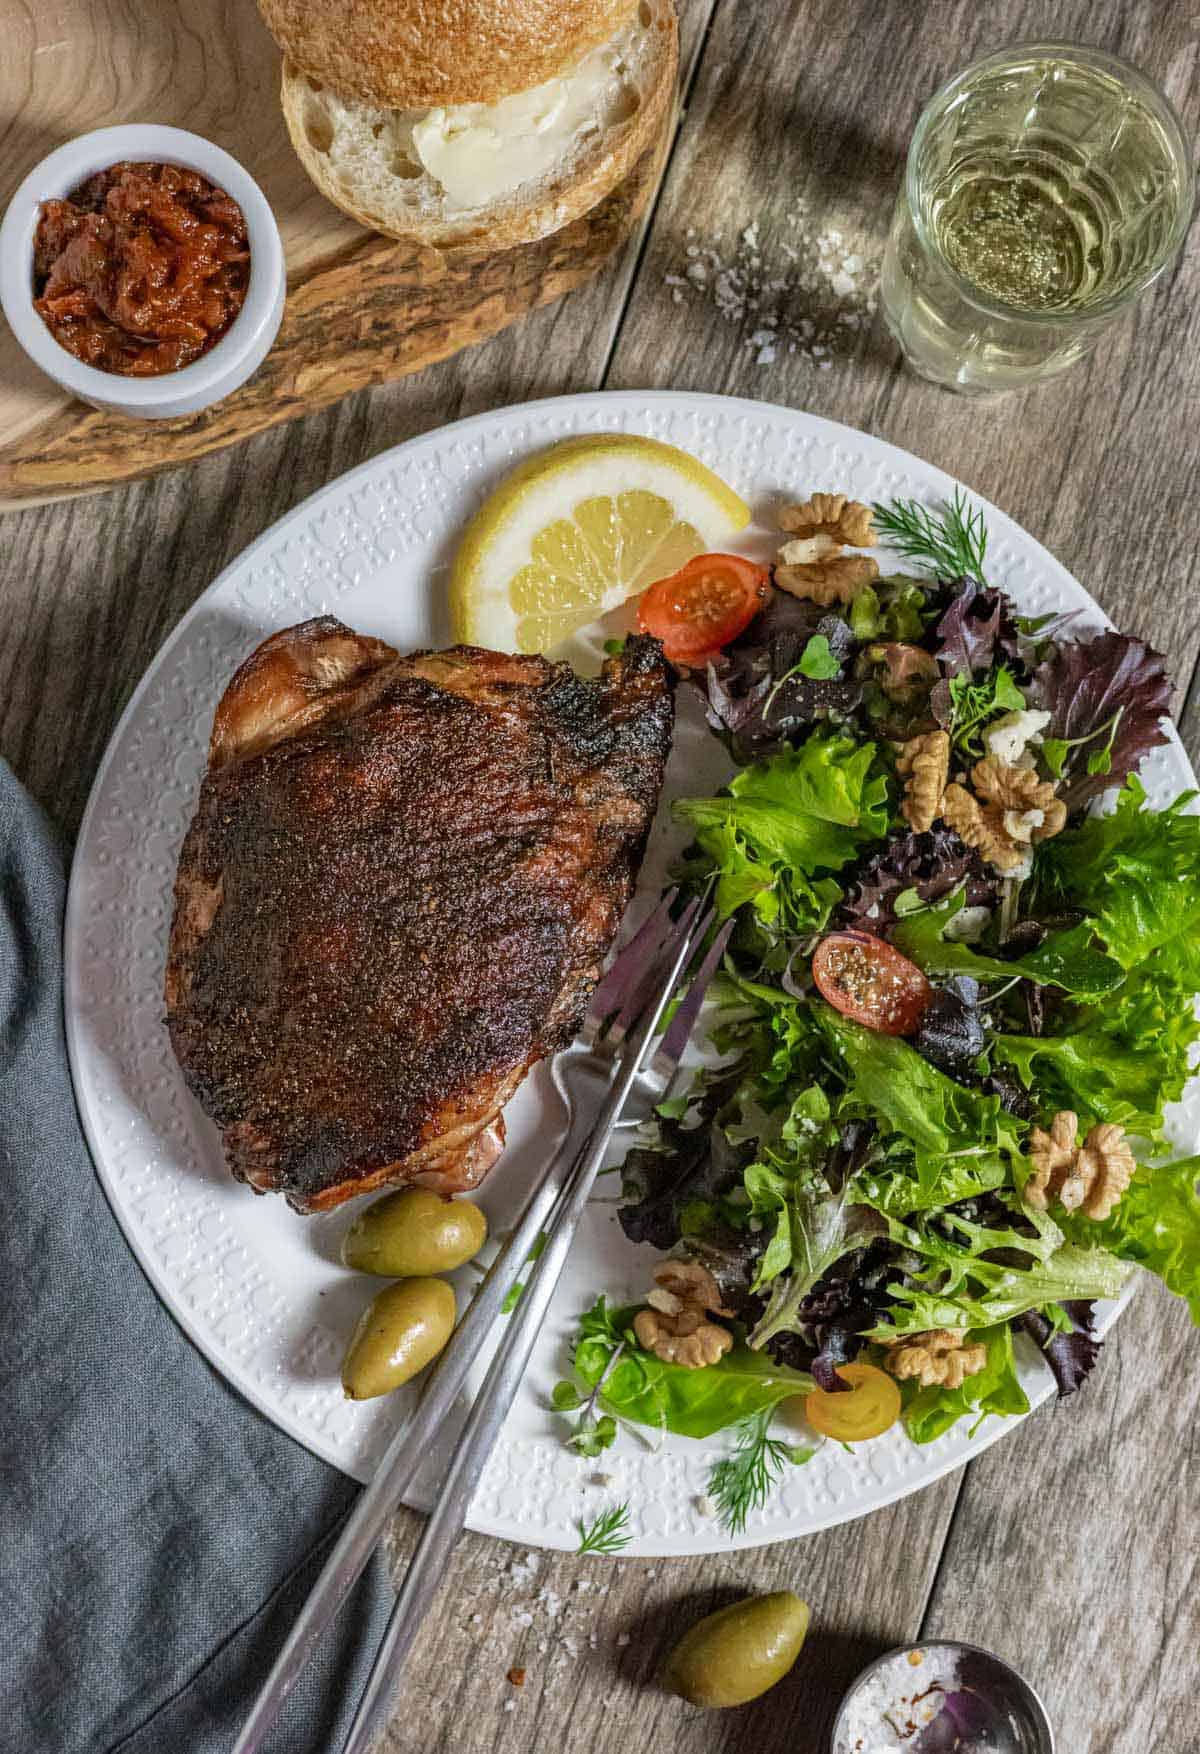 Smoked turkey thigh on a plate with green salad and olives.